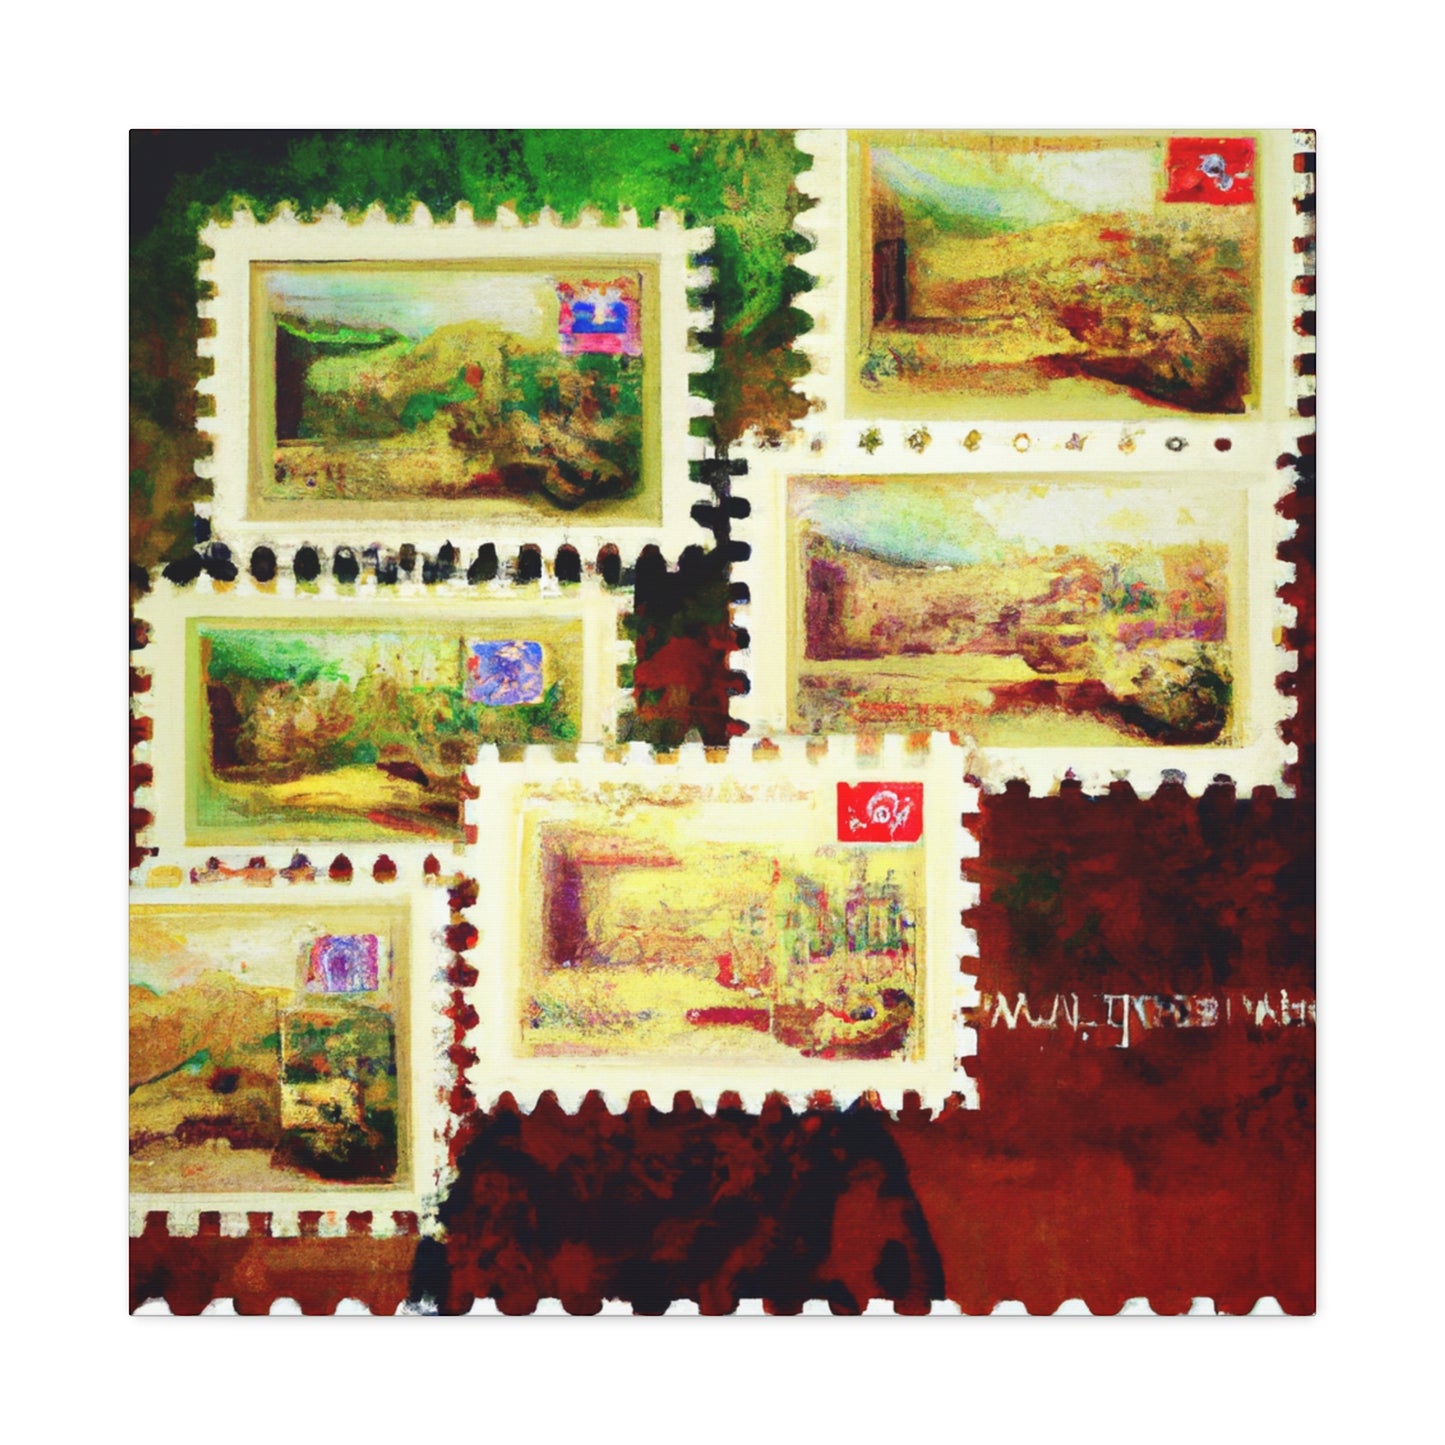 International Heritage Stamps. - Postage Stamp Collector Canvas Wall Art